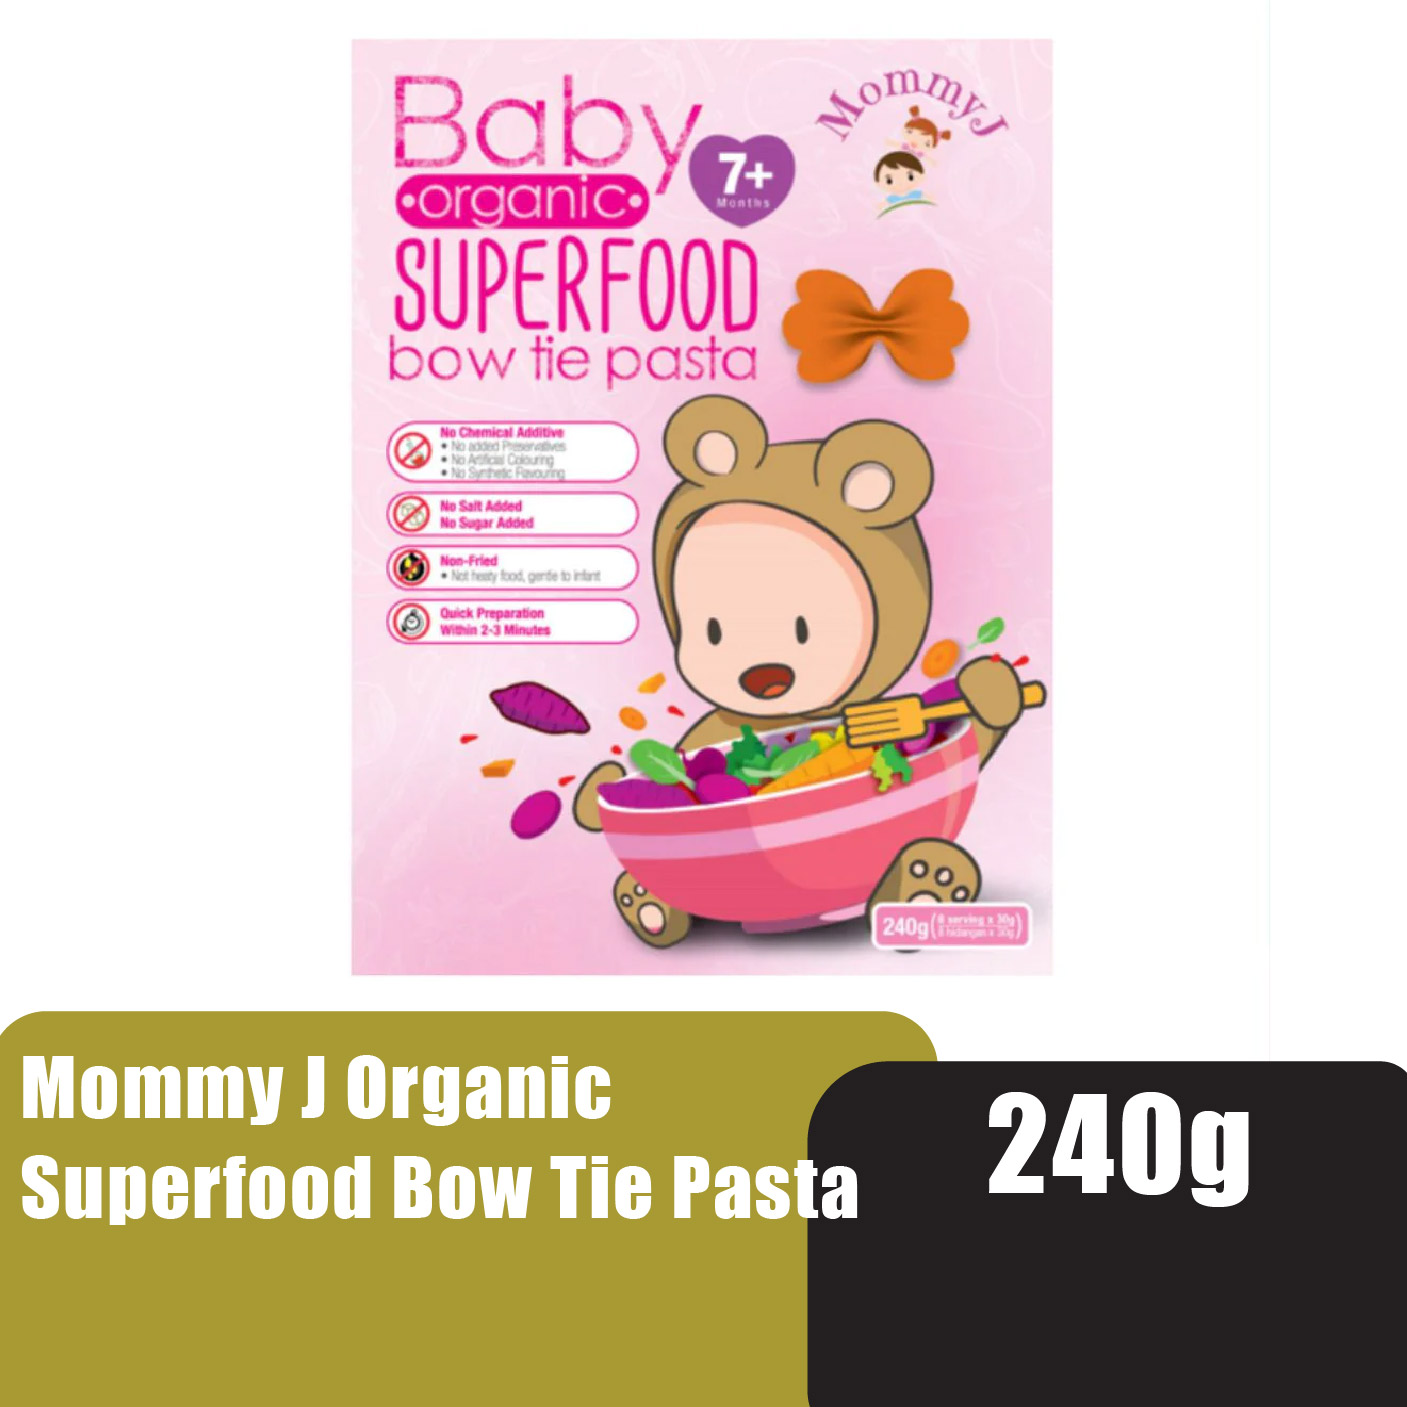 MOMMY J Organic Superfood Bow Tie Pasta 240g - Baby Food, Makanan Baby for 6+ Months